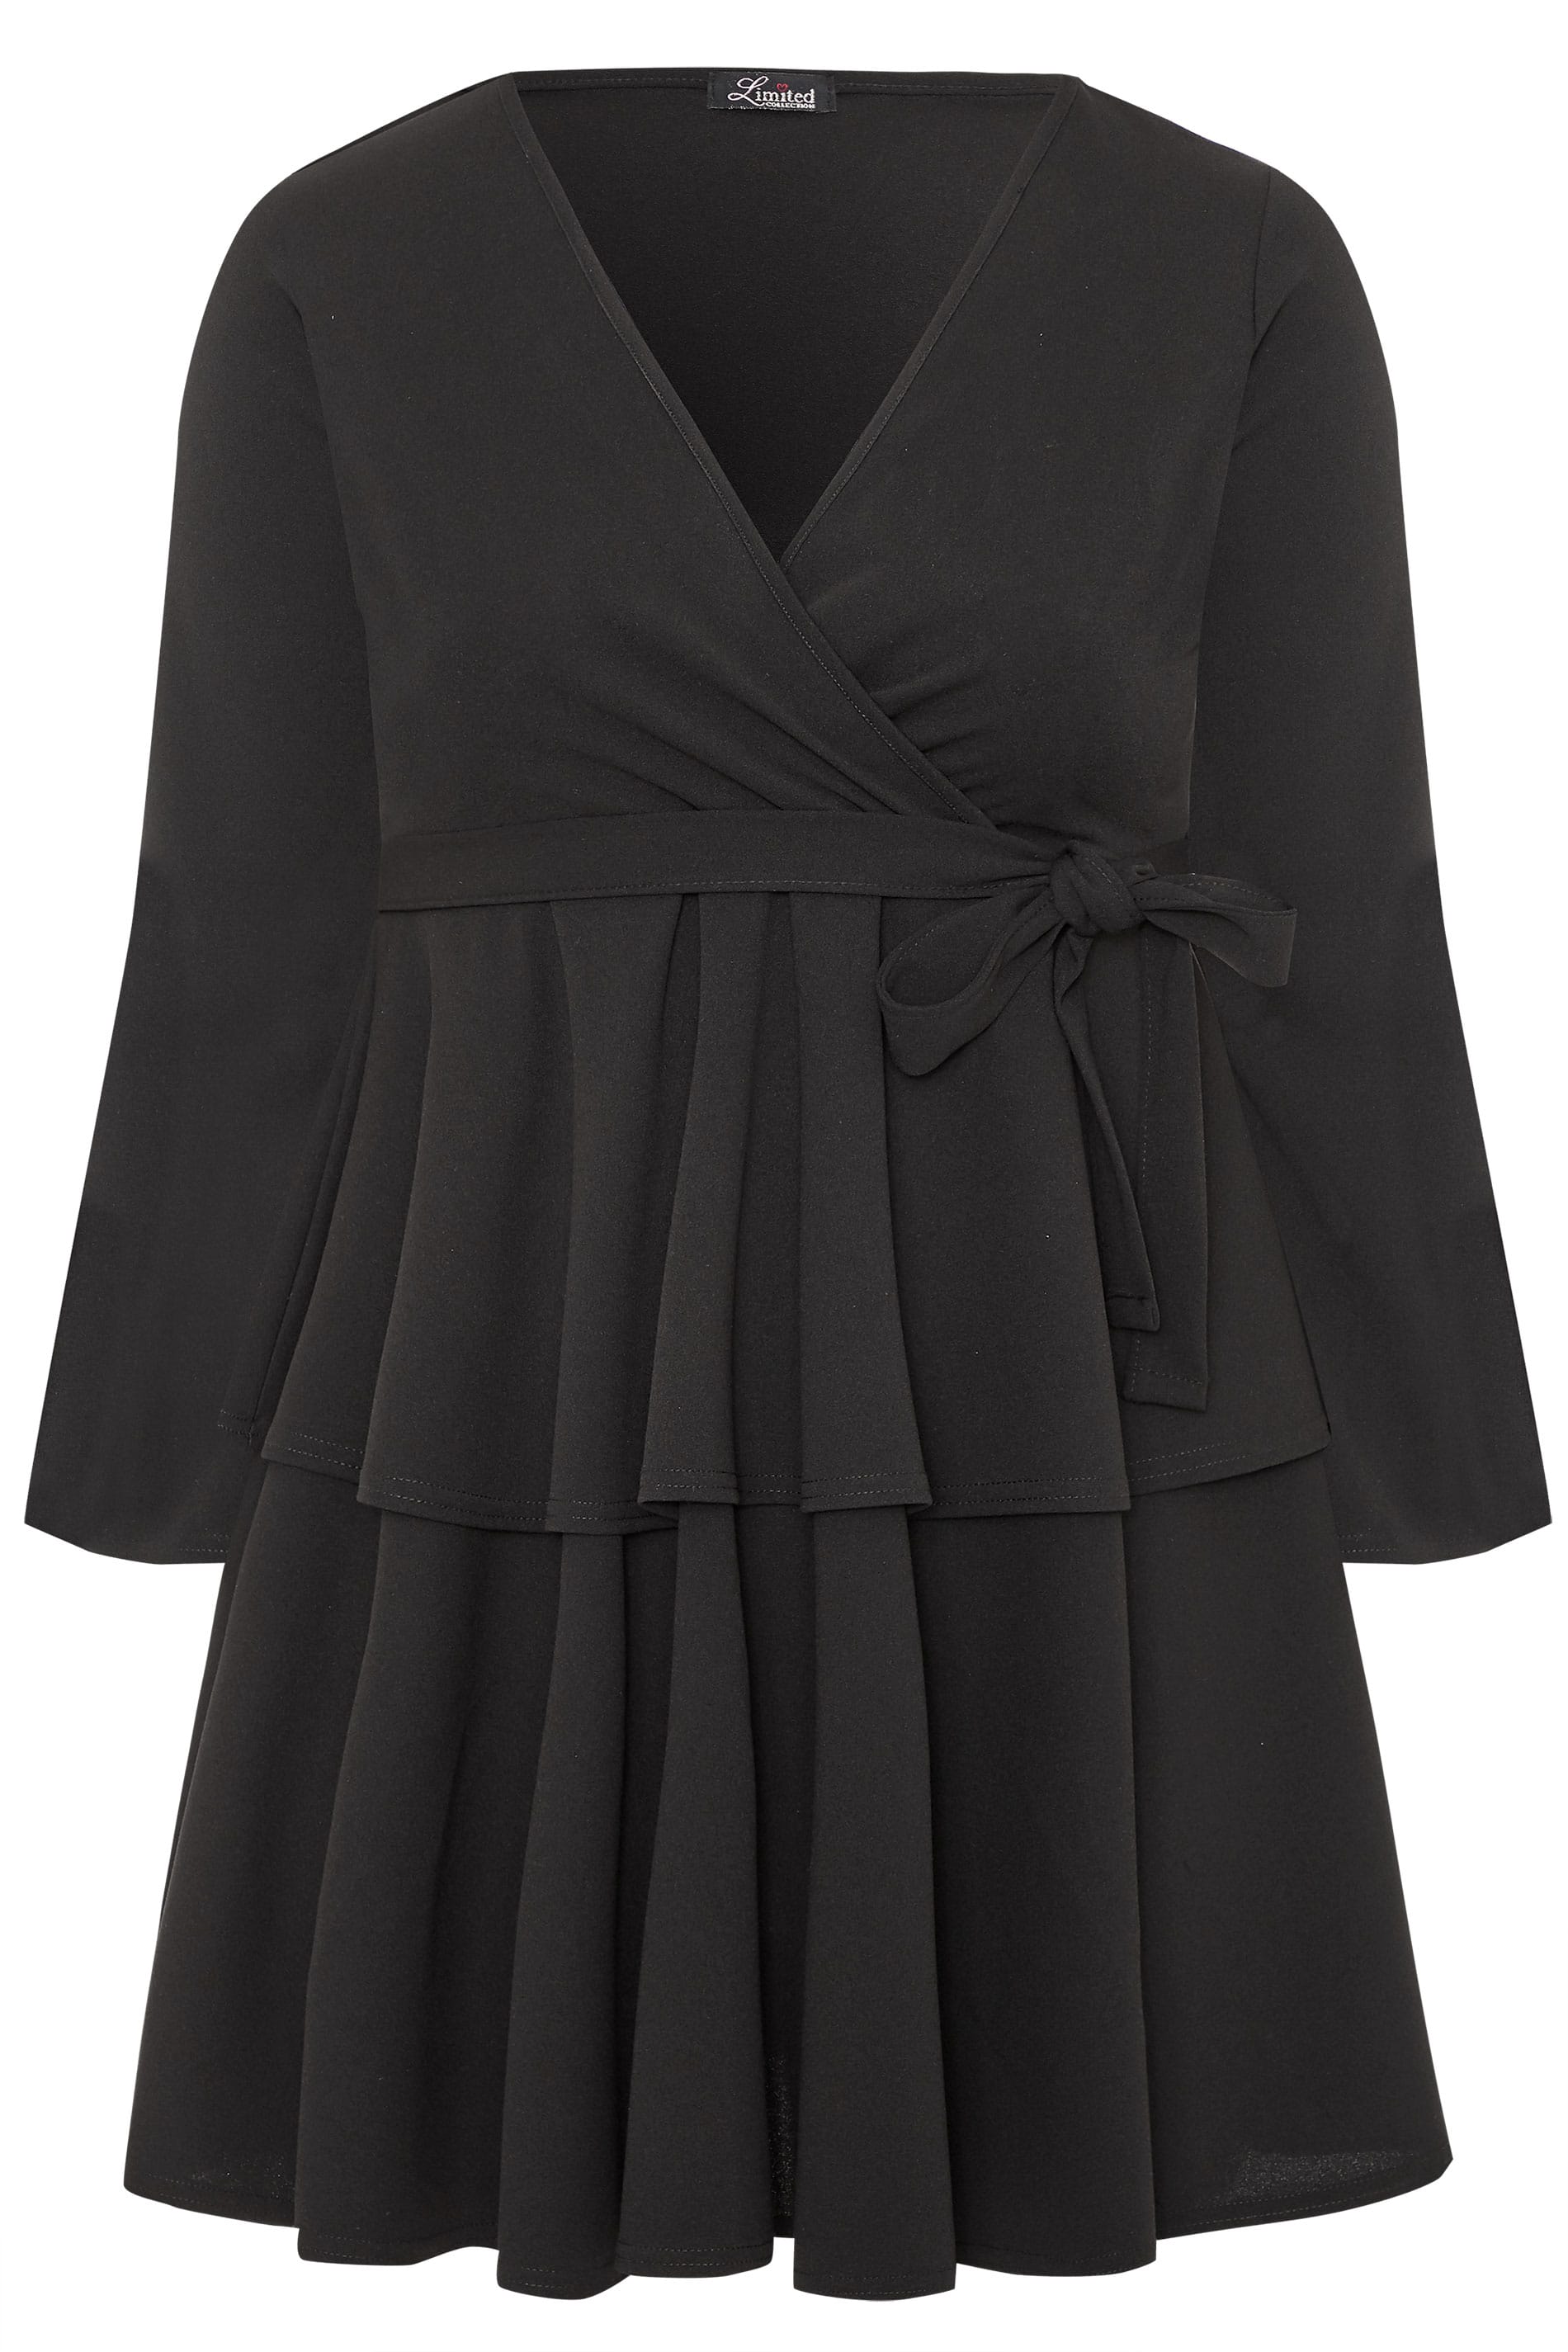 LIMITED COLLECTION Black Double Layered Frill Skater Dress | Yours Clothing